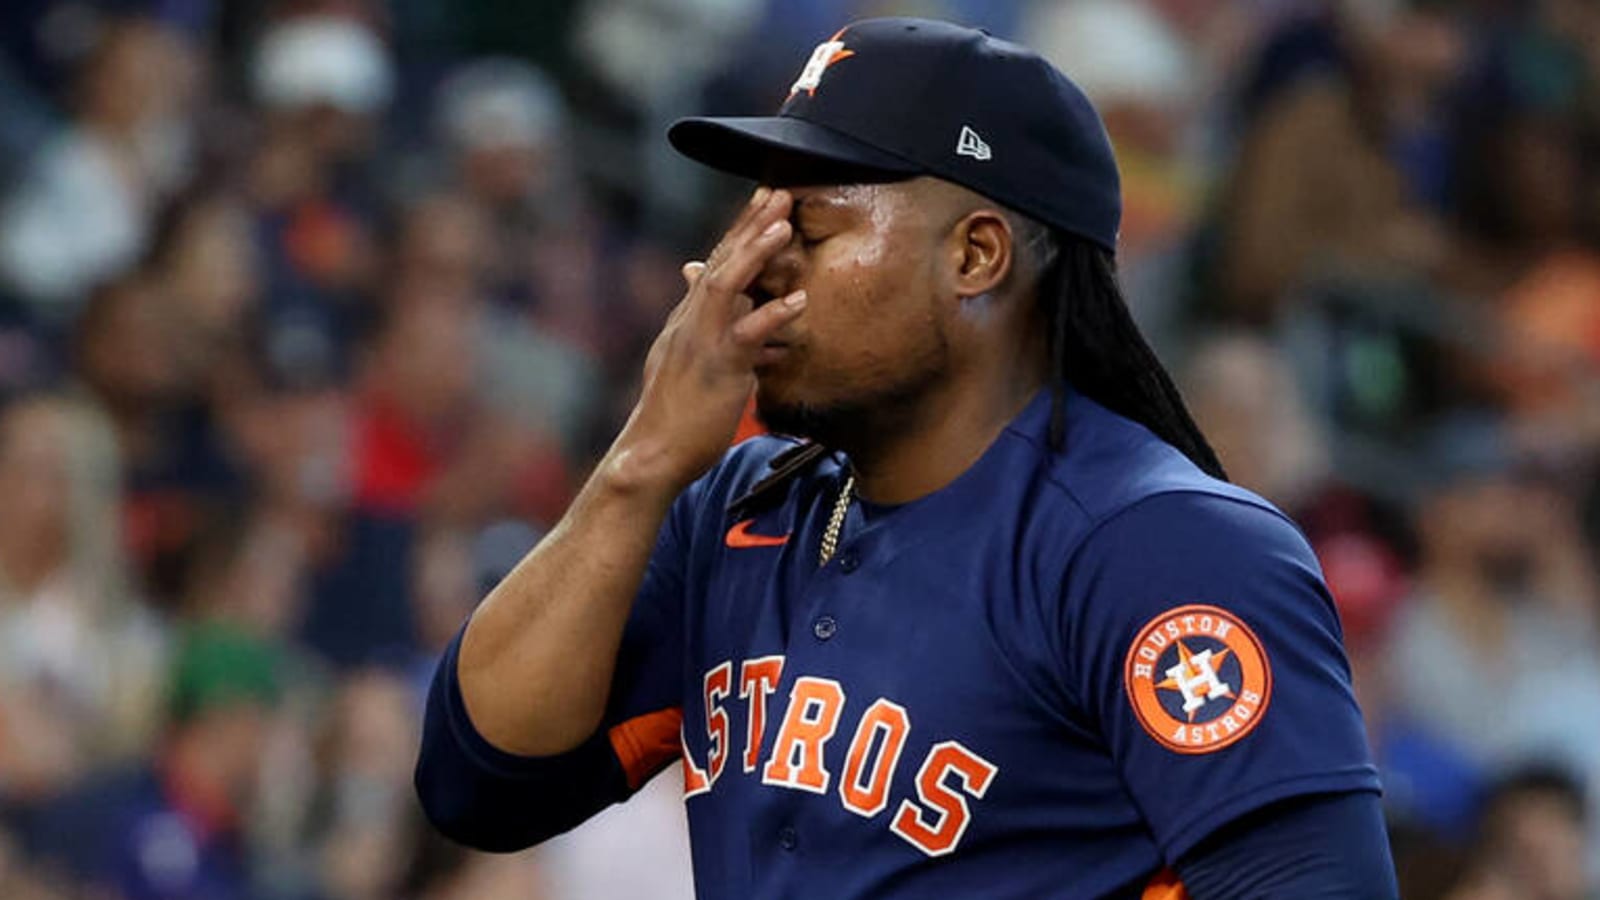 Watch: Rangers oust Astros' Valdez early with five-run outburst